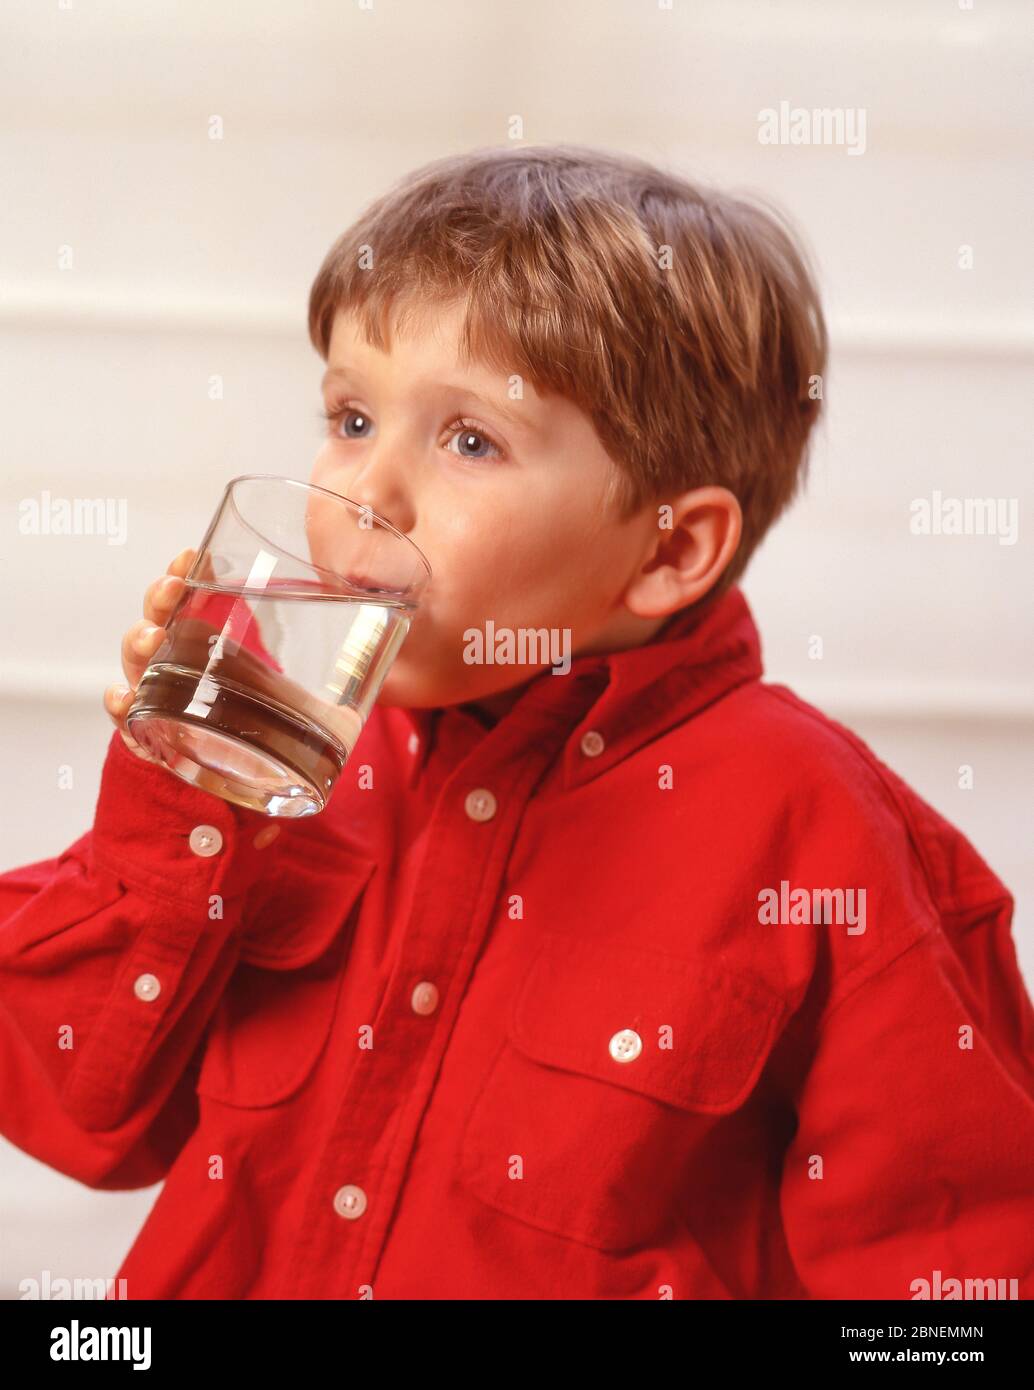 Young boy drinking glass of water, Winkfield, Berkshire, England, United Kingdom Stock Photo